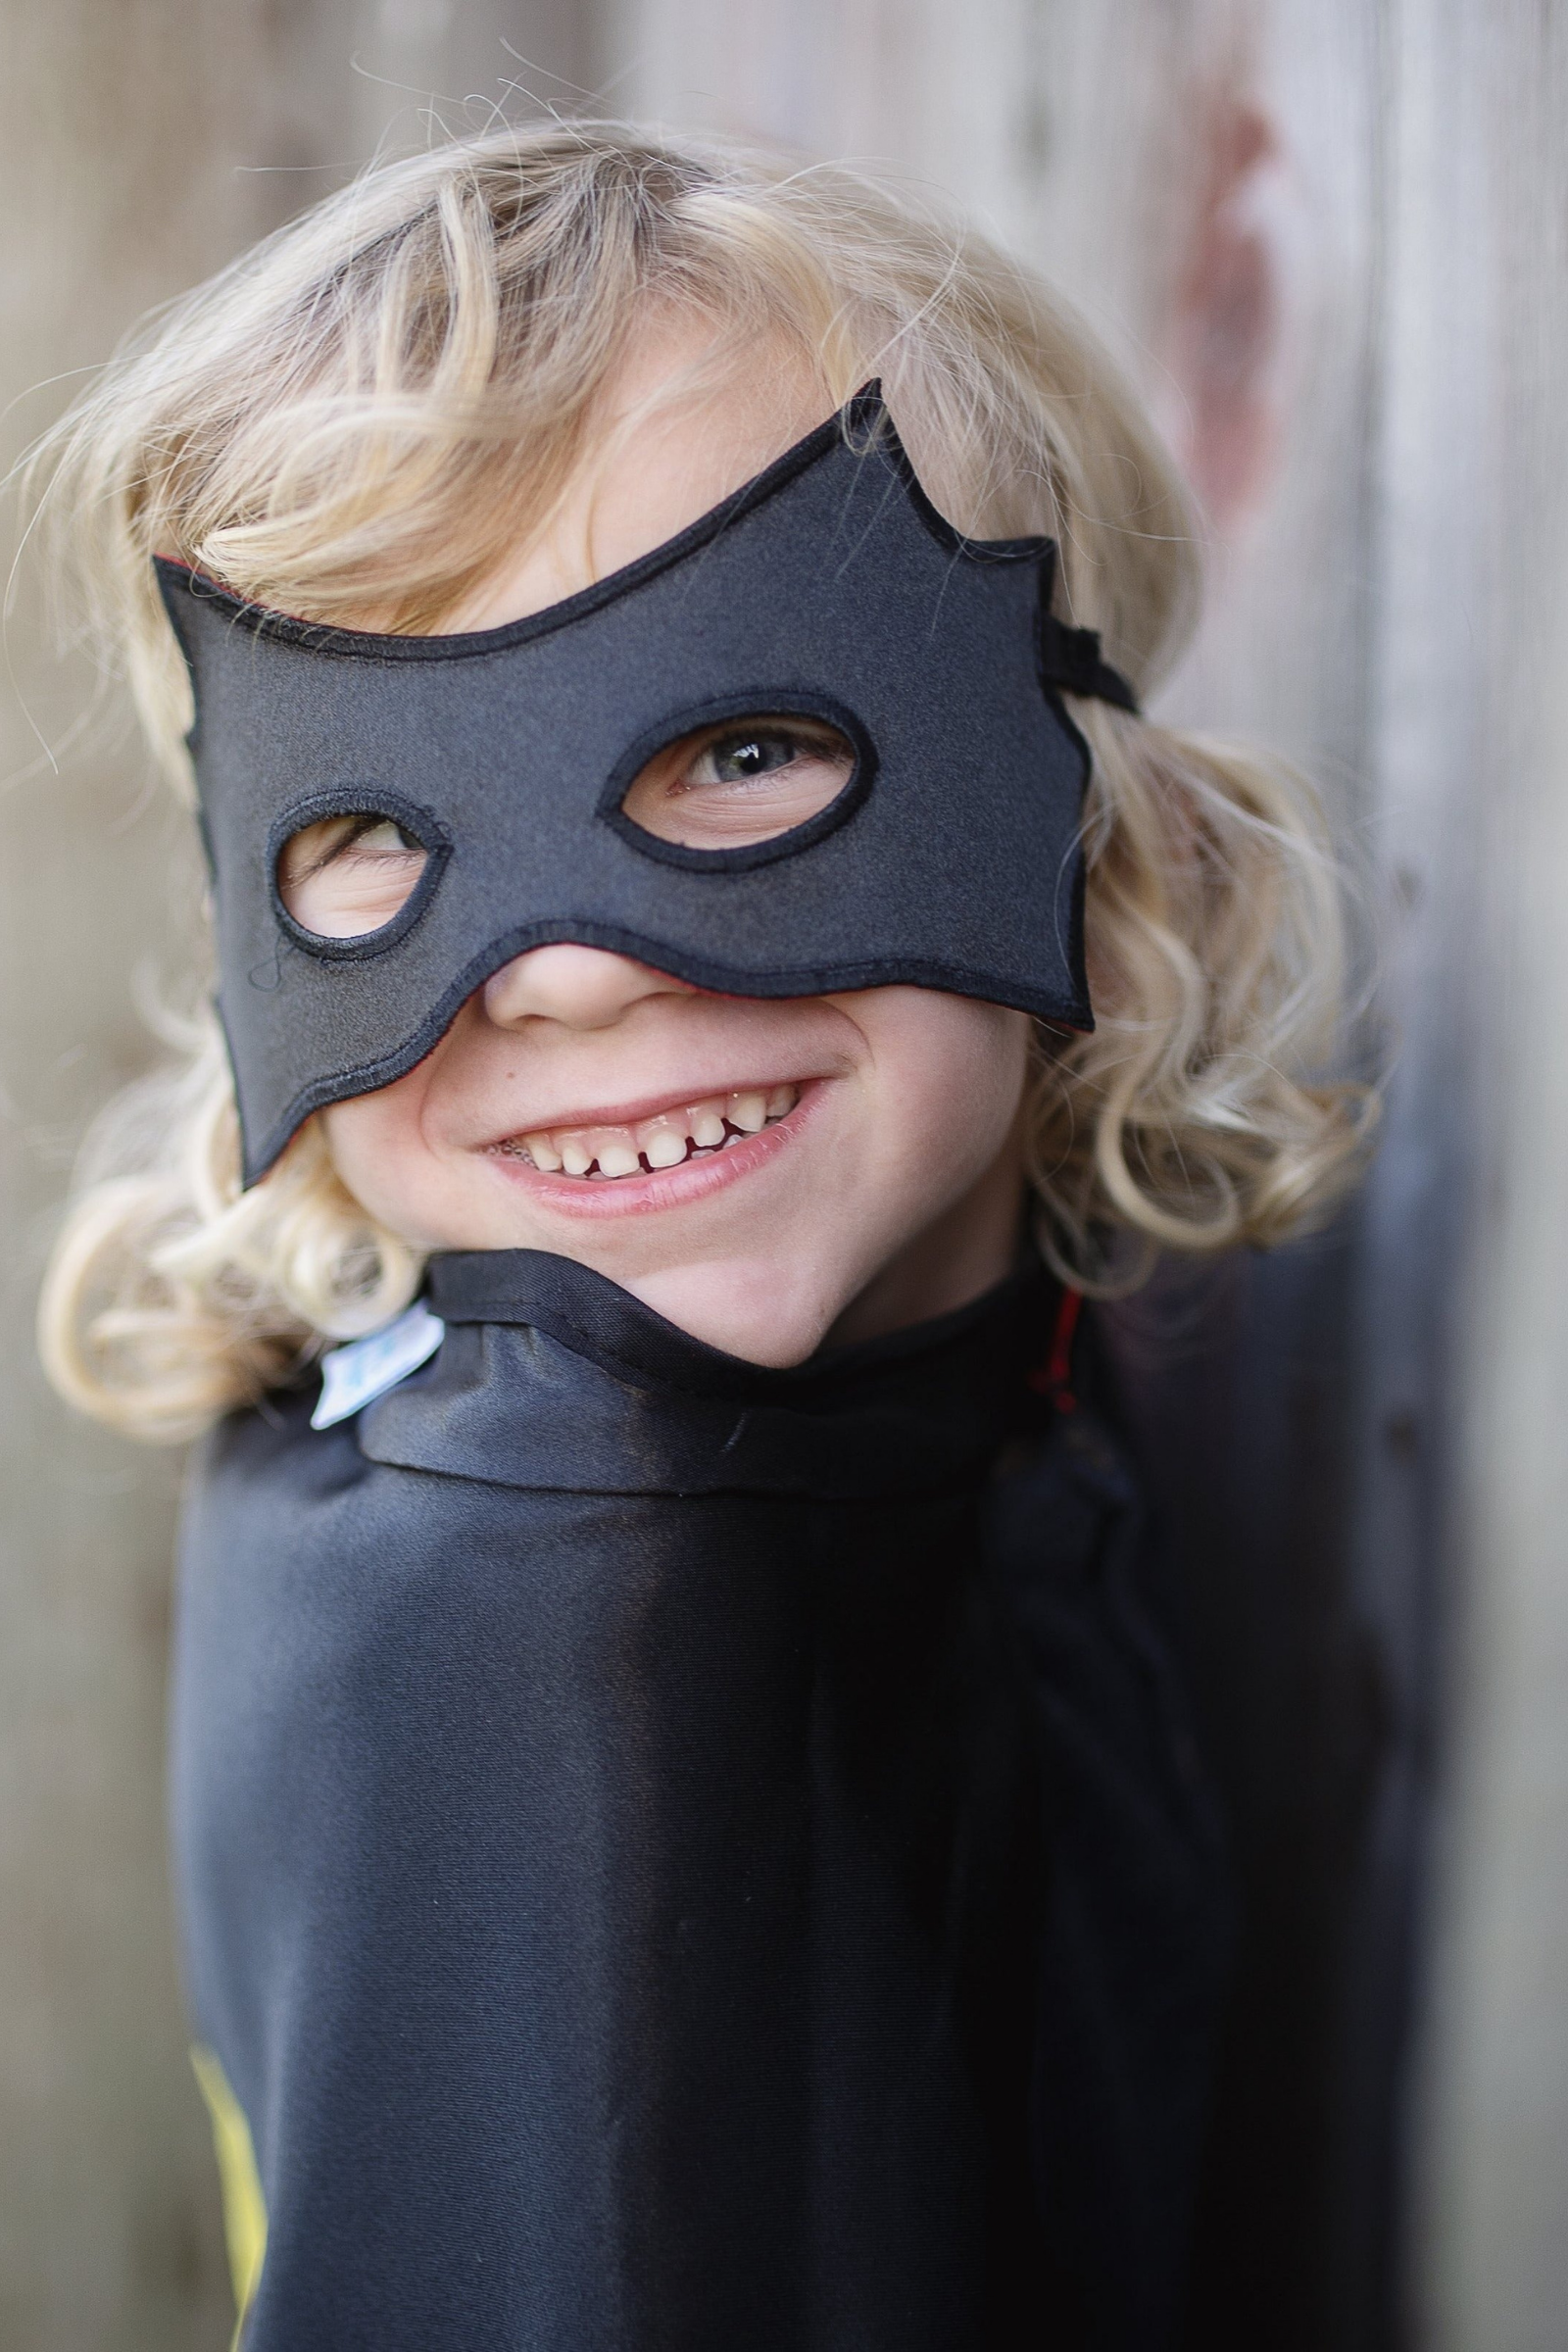 Reversible Spider Bat Cape and Mask